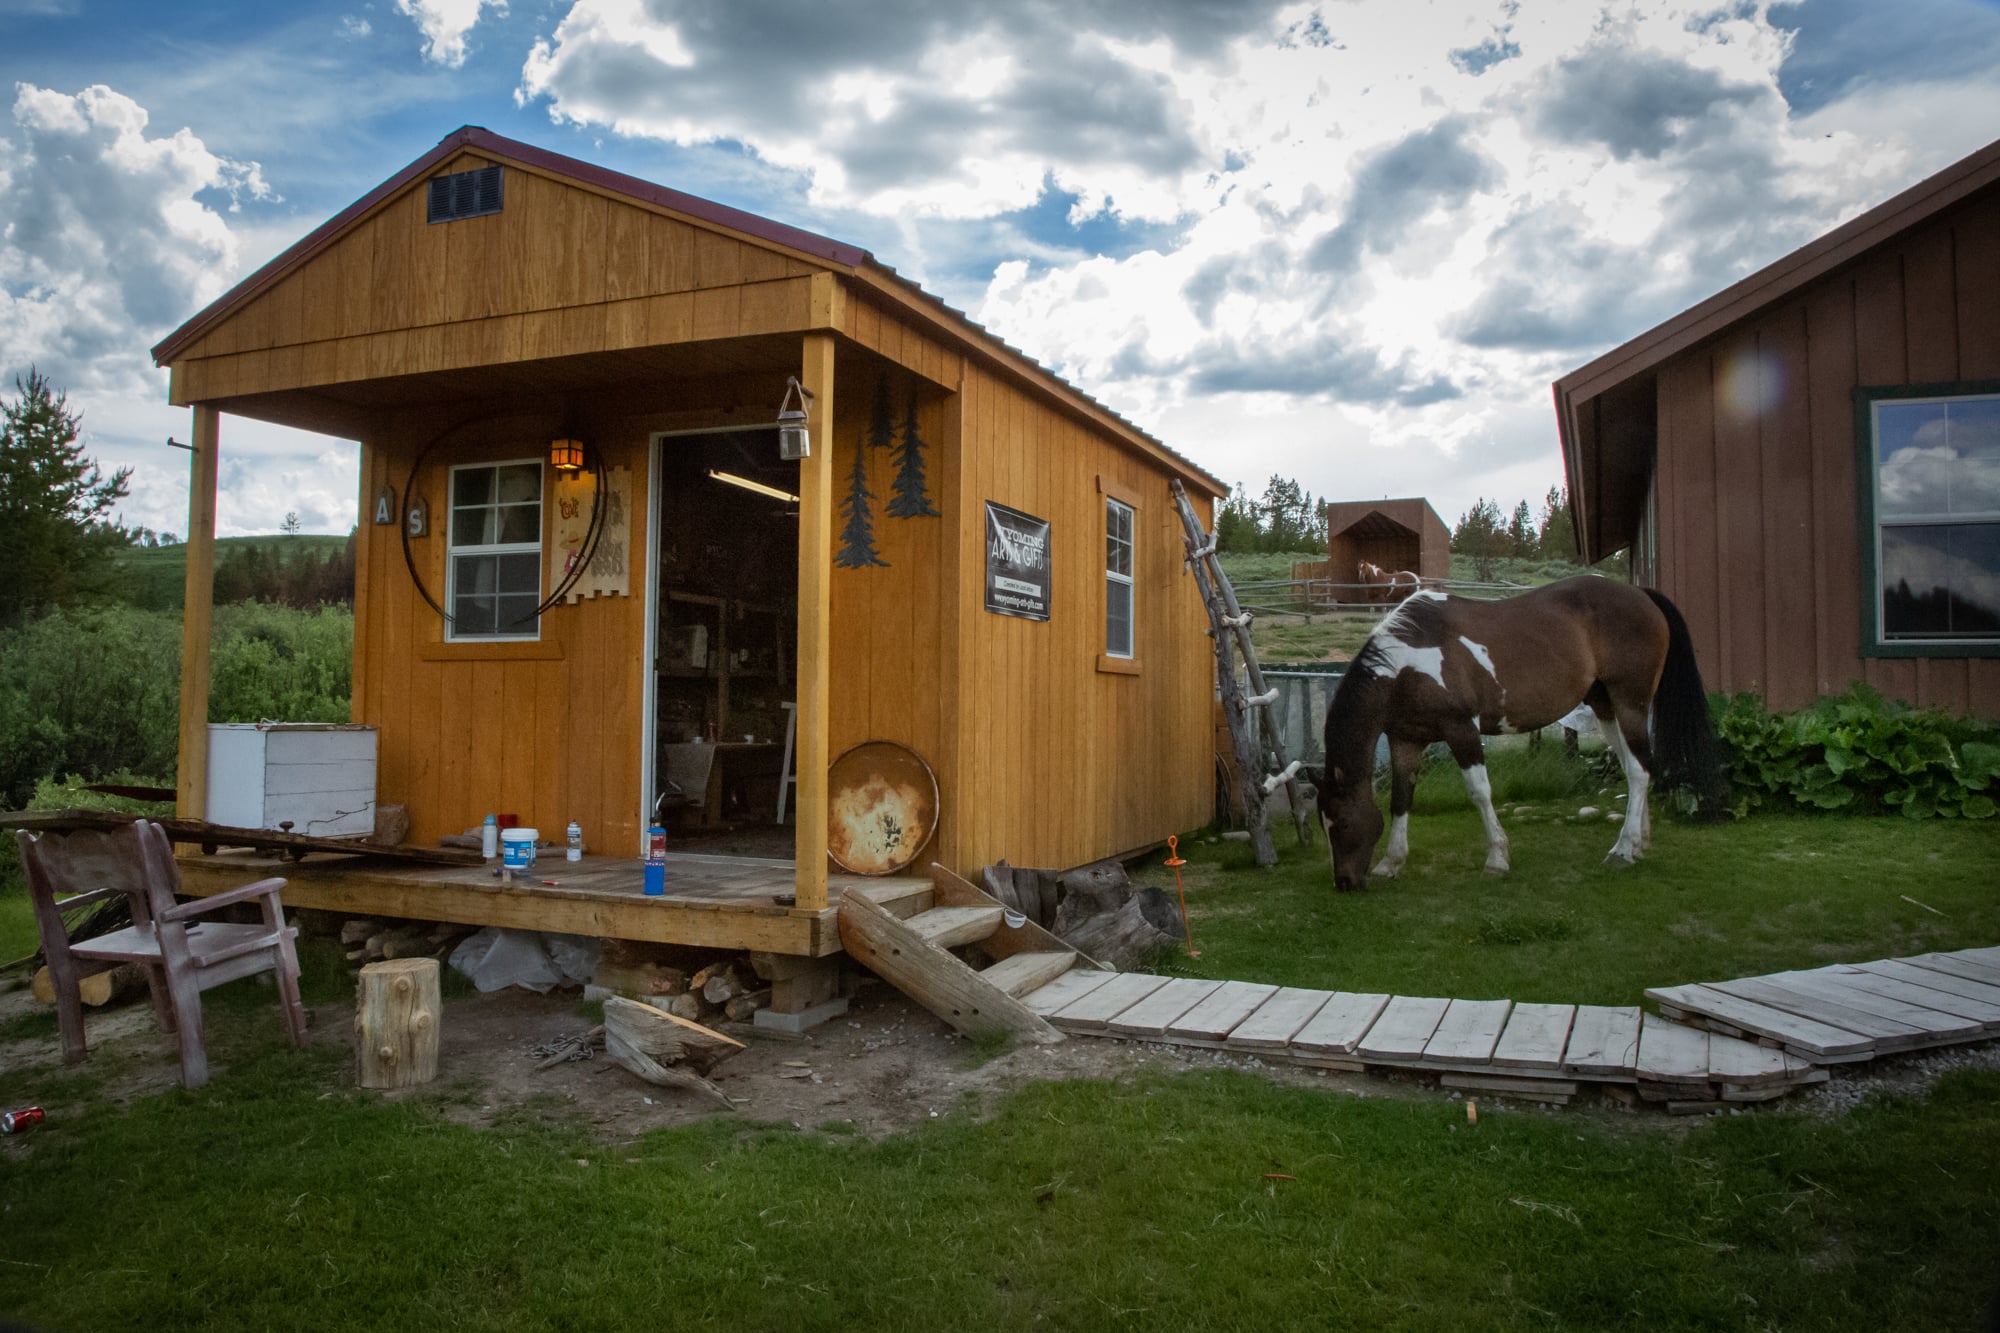 Sramek rides her horse, Easy, and makes art in her “she shed“ to cope with the intense pain of multiple sclerosis. The former flight attendant and art teacher moved to Hoback Ranches seven years ago. (Bailey Lewis/News21)